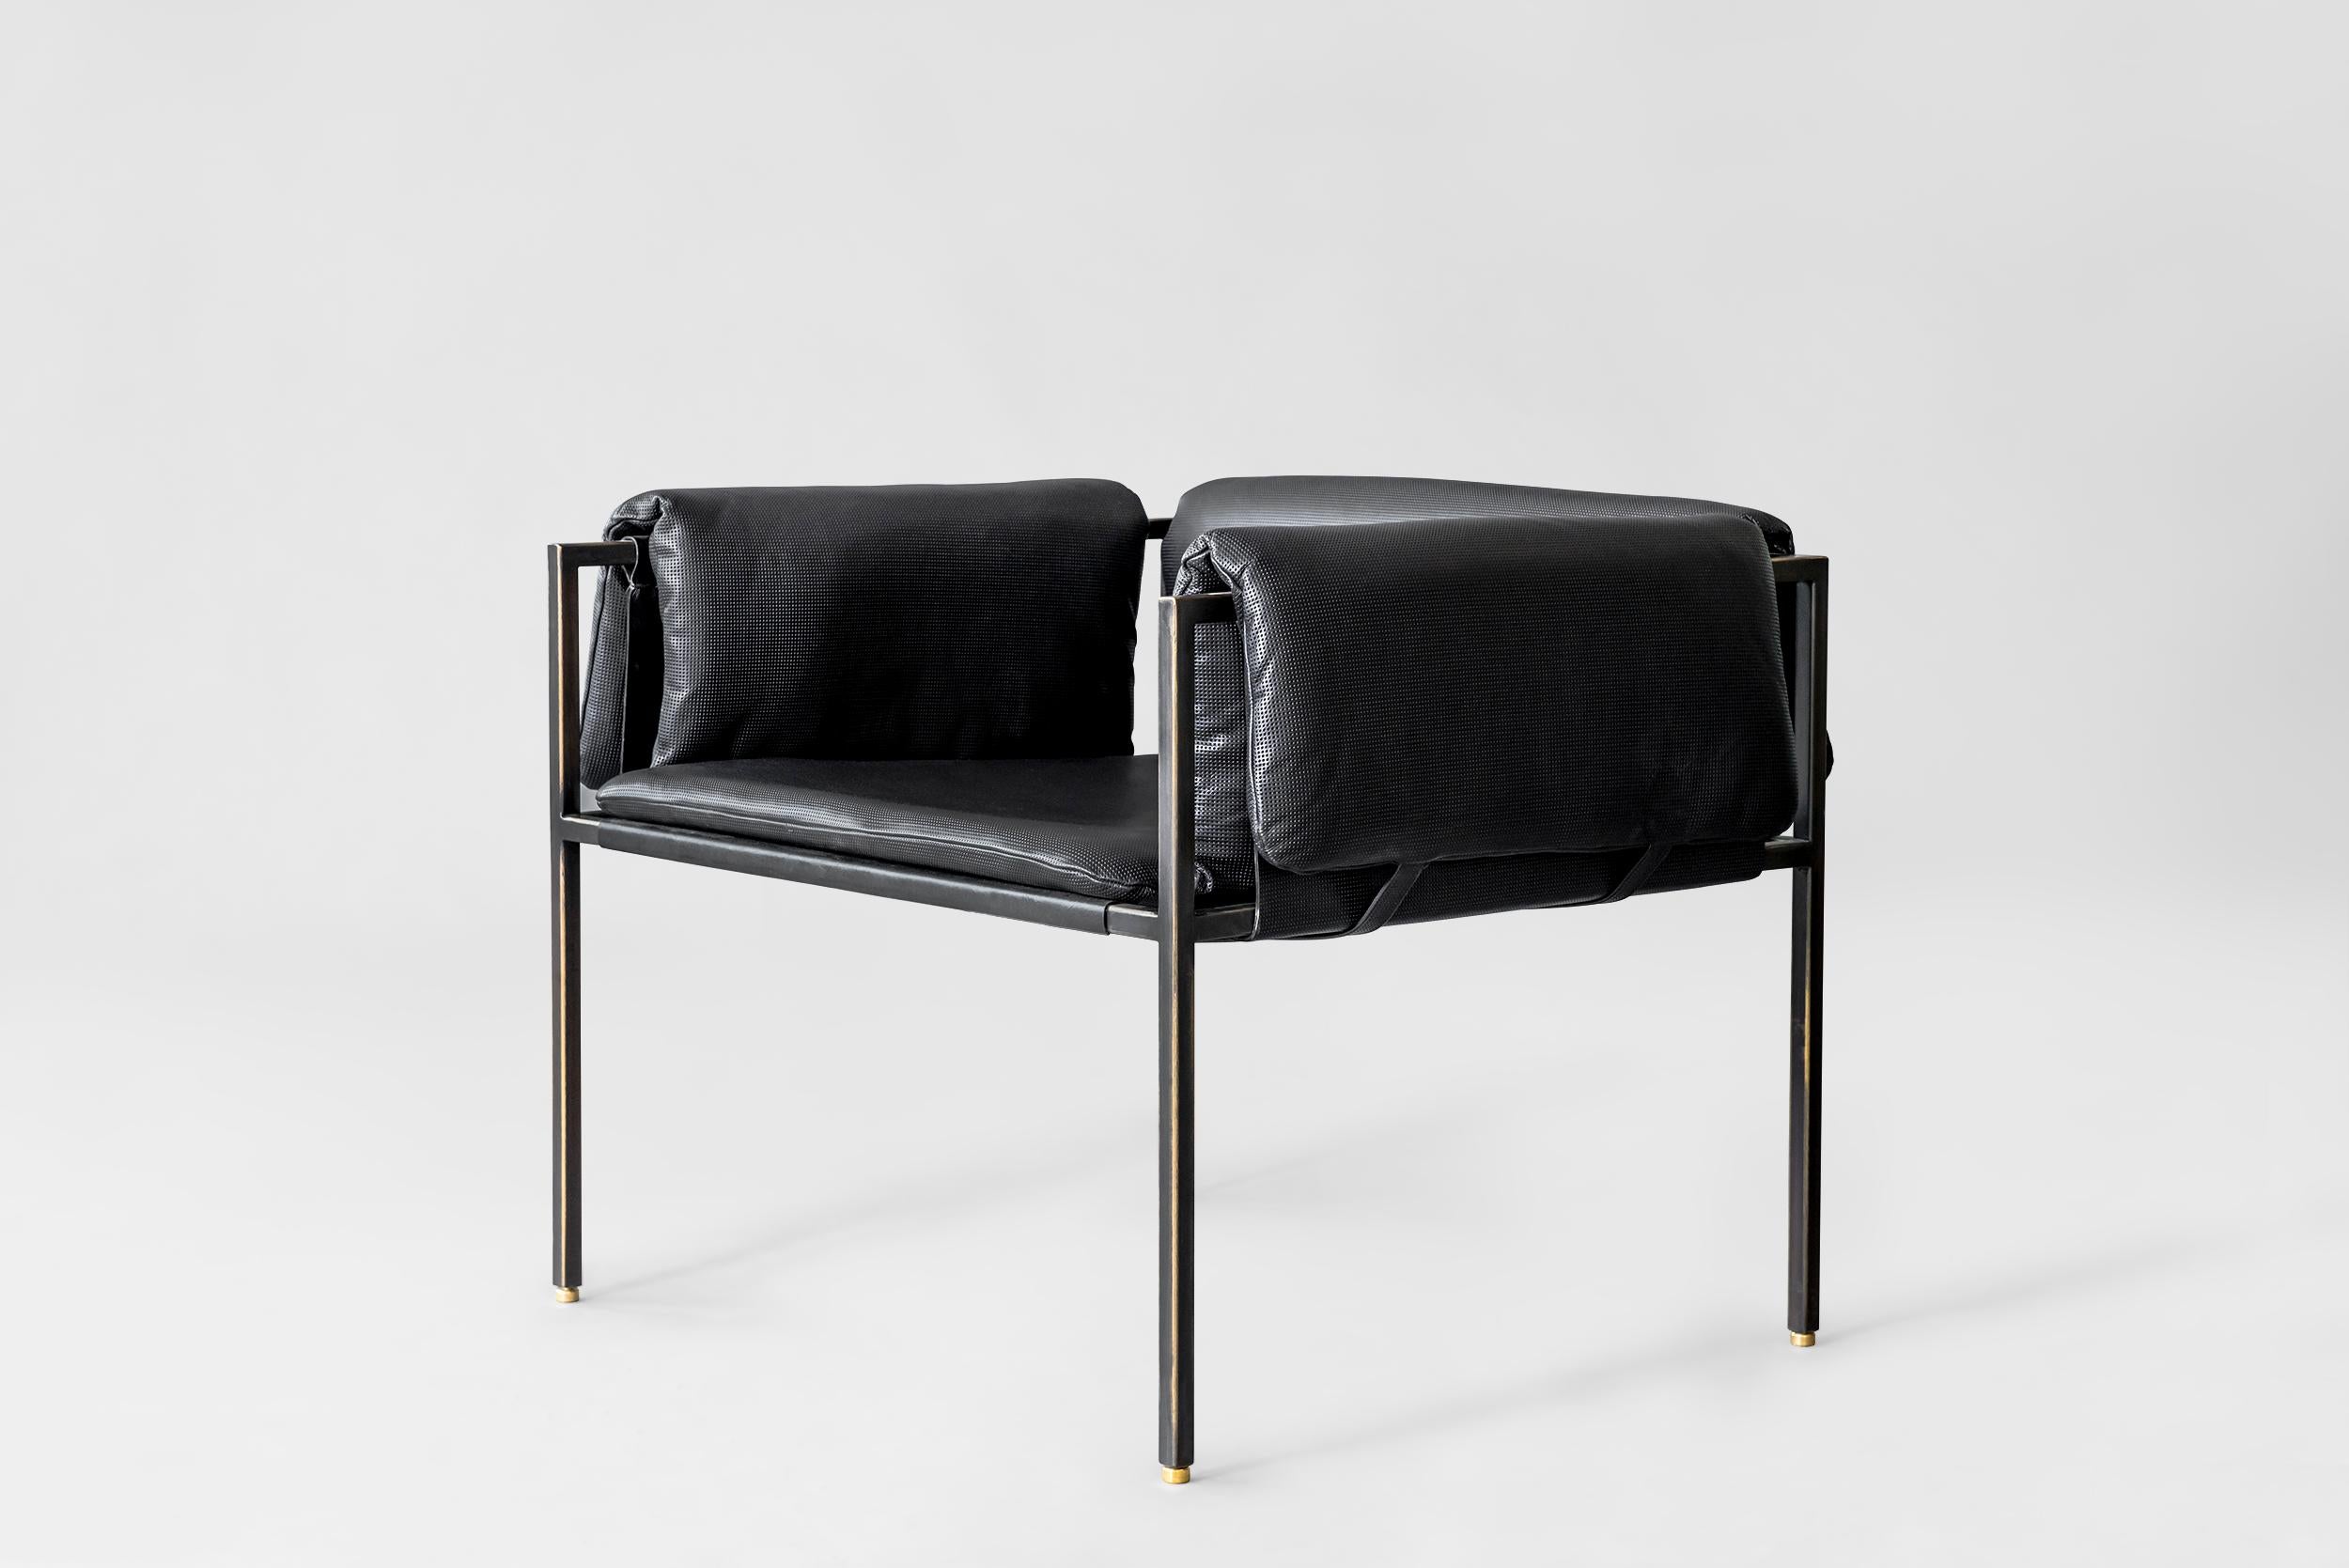 Flow lounge chair by Atra Design
Dimensions: D 75.5 x W 75.6 x H 60.2 cm
Materials: Lamborgini leather, blackened steel with brass caps

Atra Design
We are Atra, a furniture brand produced by Atra form a mexico city–based high end production